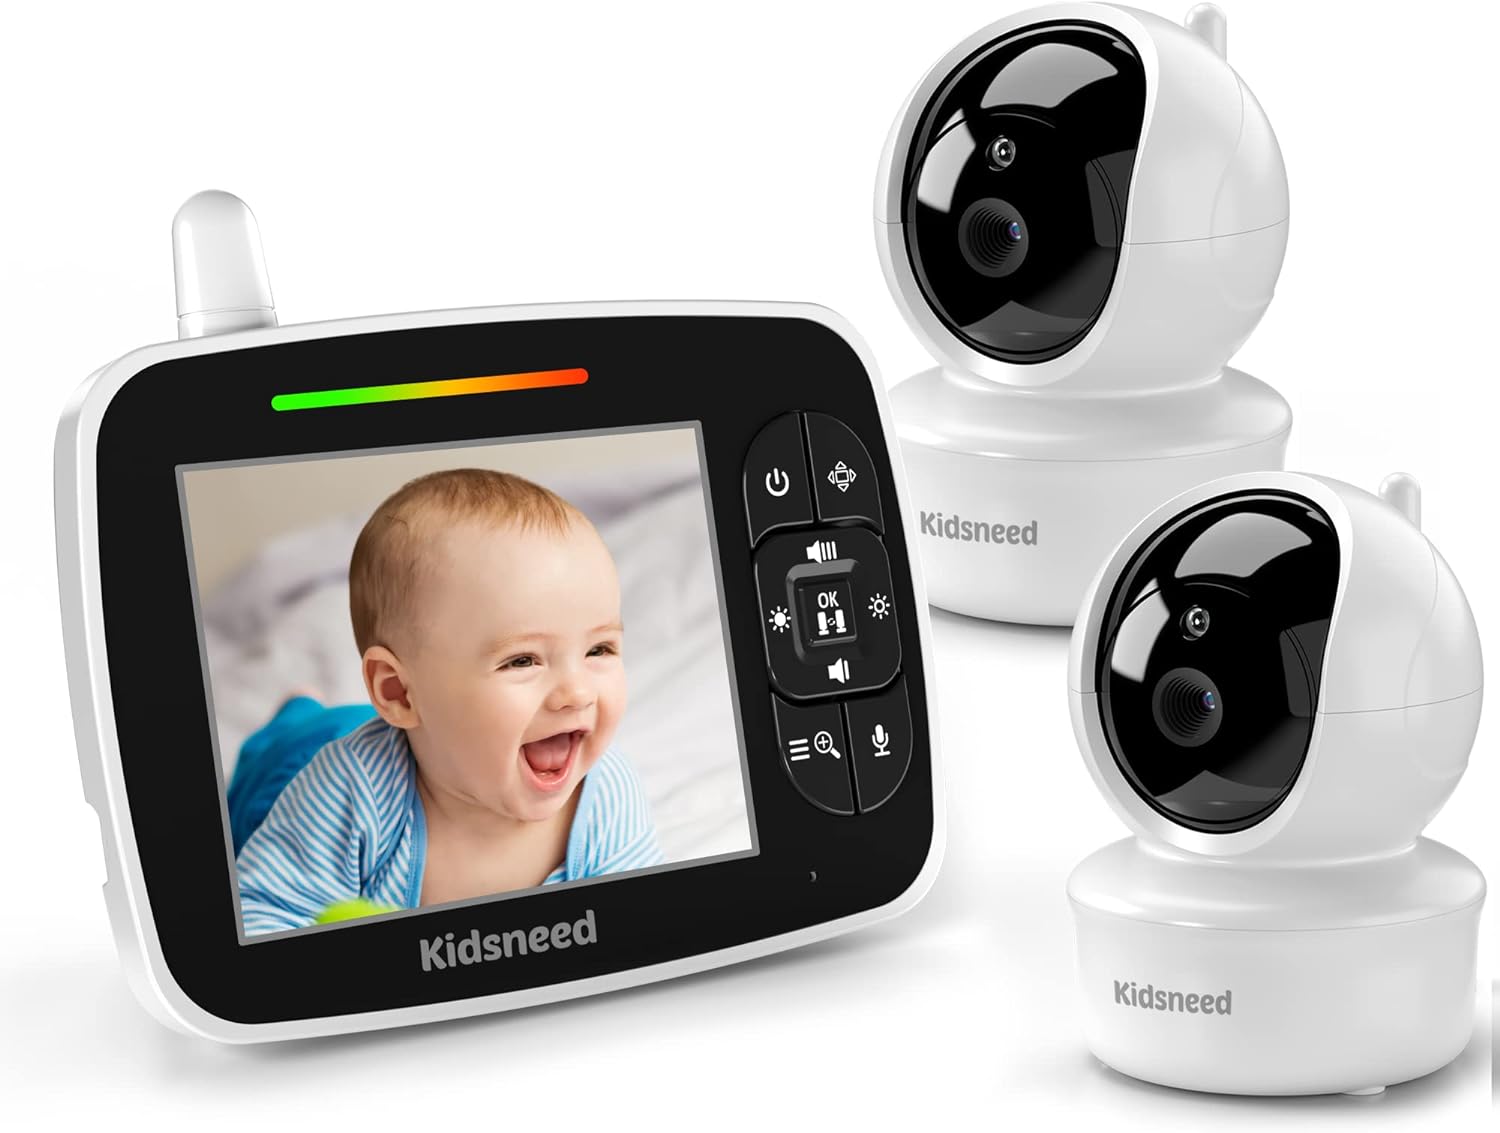 Kidsneed Baby Monitor with 2 Cameras.  Video Baby Monitor with Remote Pan-Tilt-Zoom Camera, Large Screen Night Vision, Two Way Talk, Tem